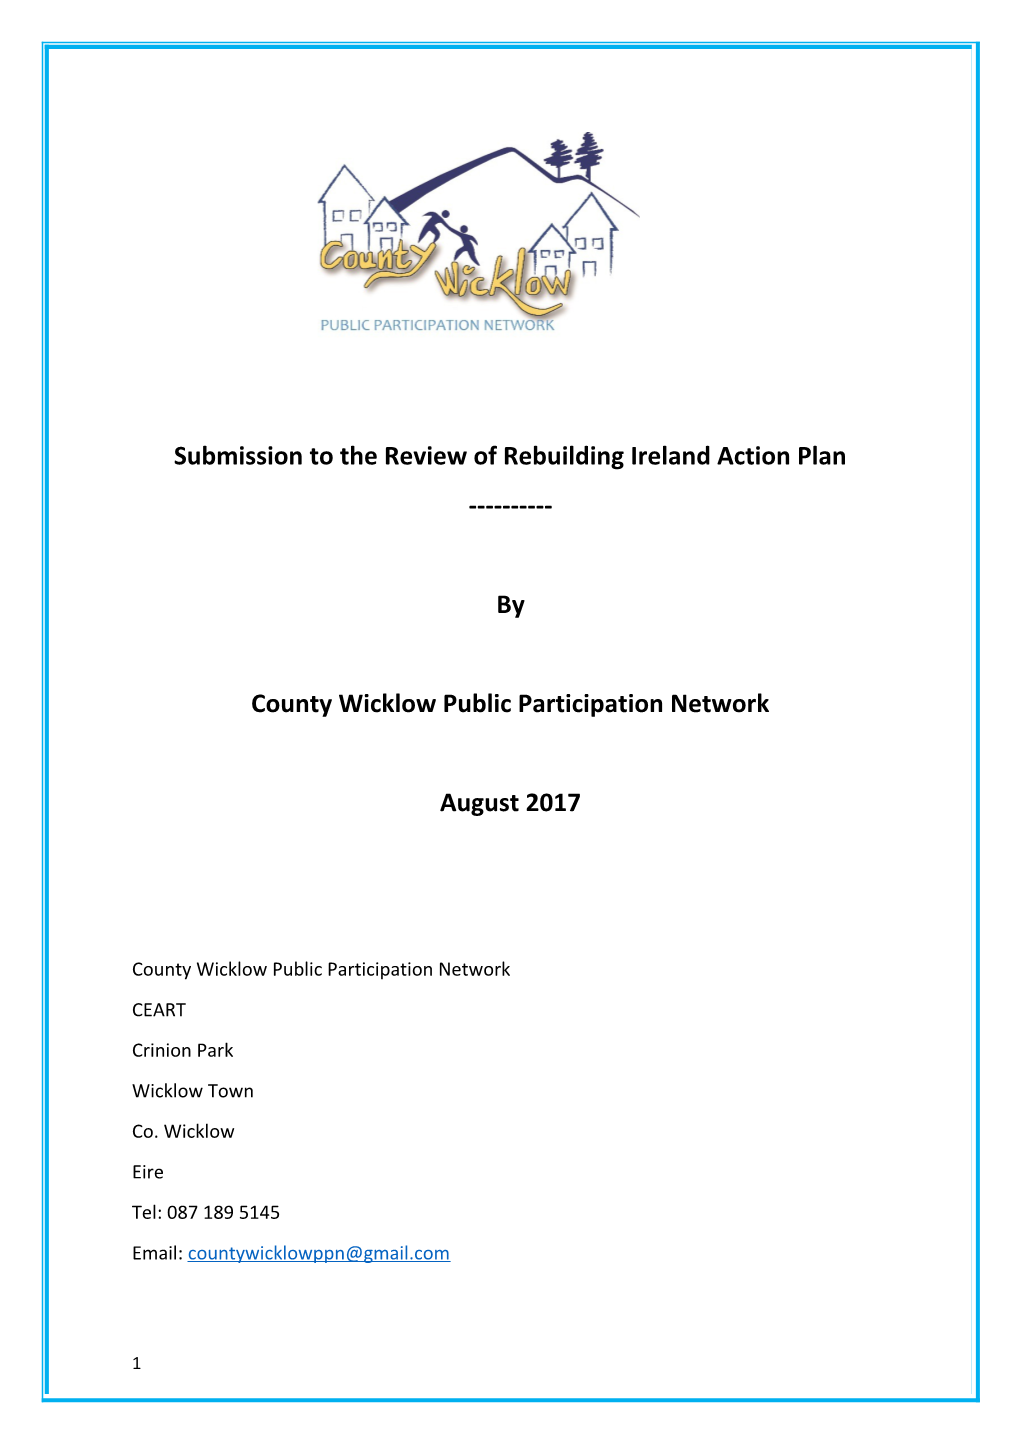 Submission to the Review of Rebuilding Ireland Action Plan